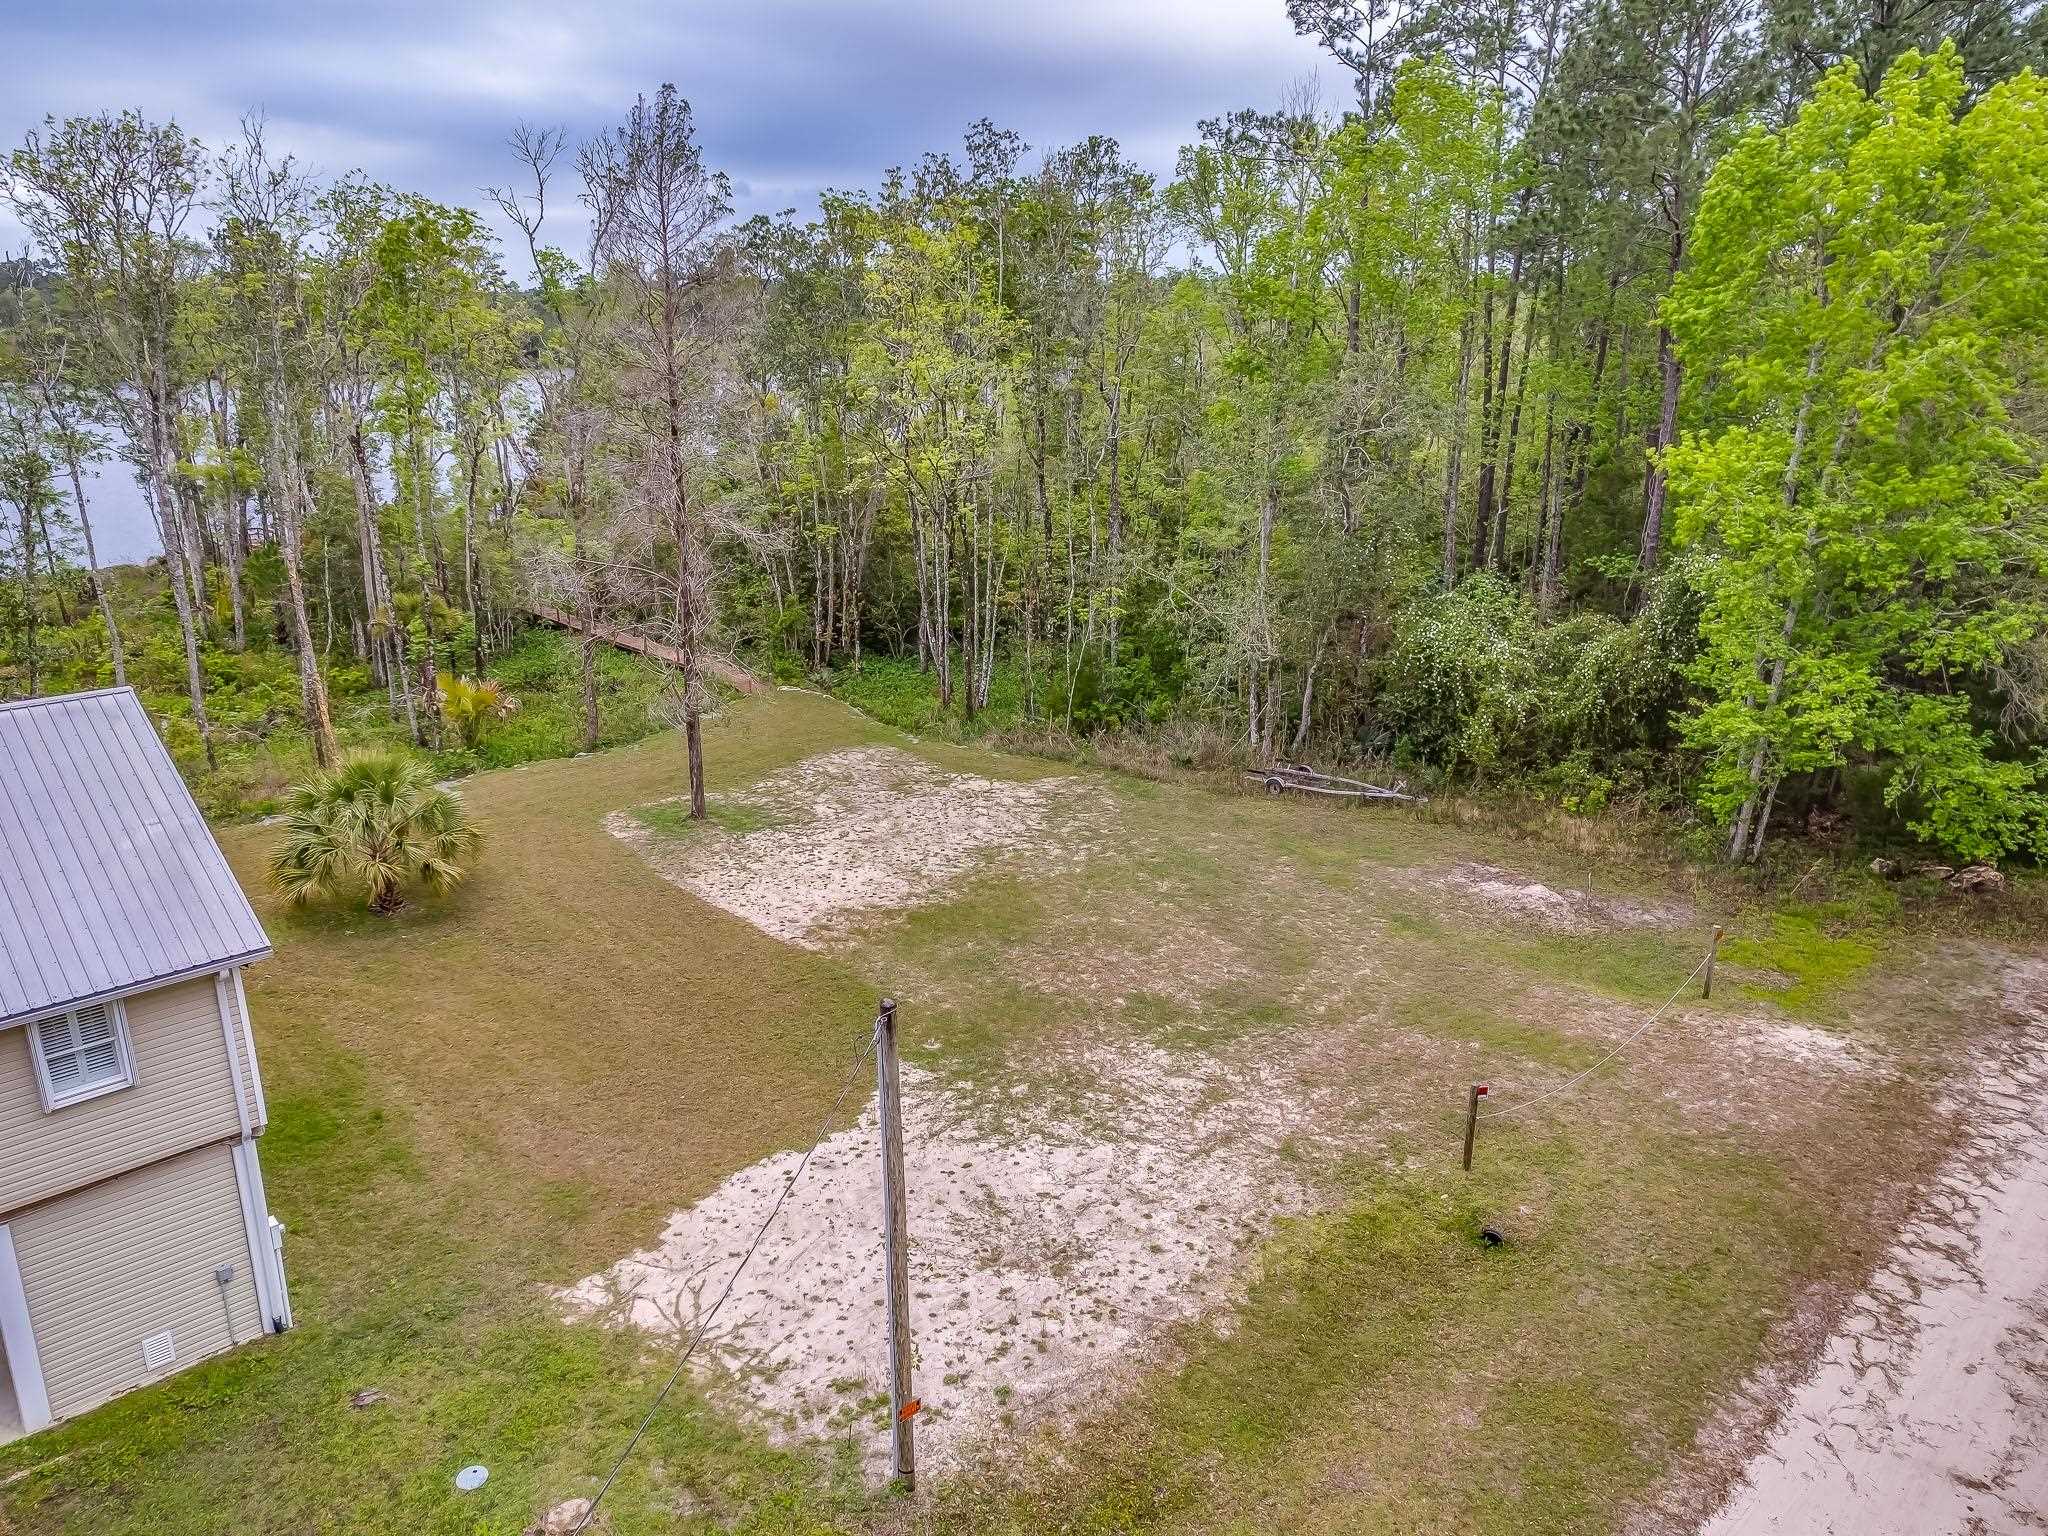 Lot 7 Gibson,SOPCHOPPY,Florida 32358,Lots and land,Gibson,370197